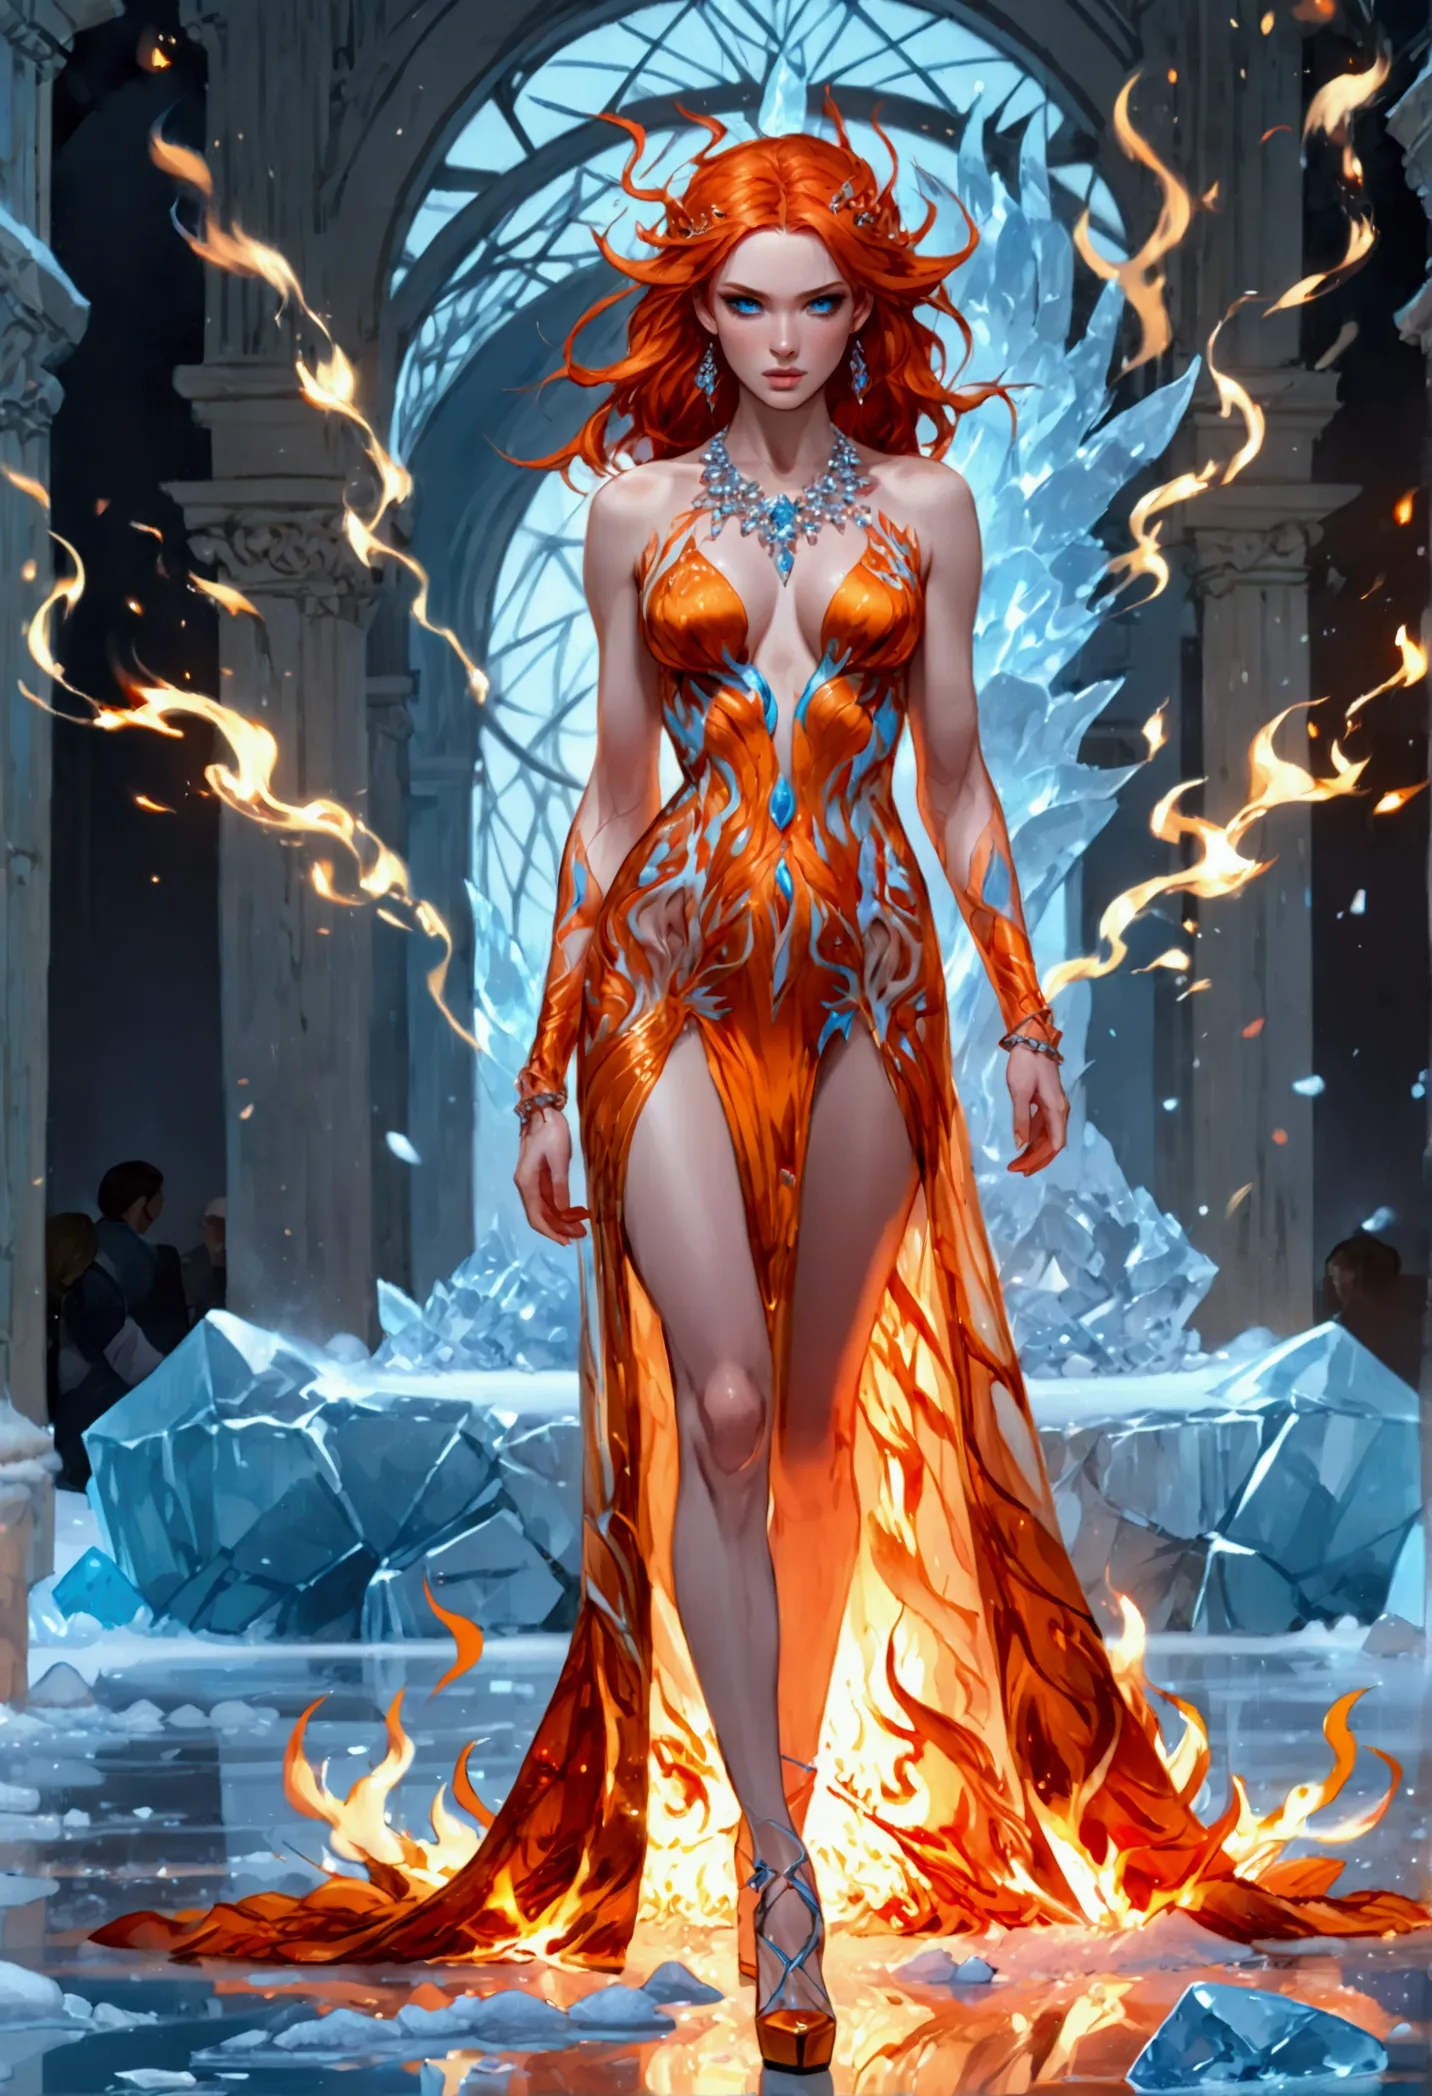 a glamour picture shot, of an elite model covered in fire walking on a icy catwalk, an extraordinary glamourous elite female mod...